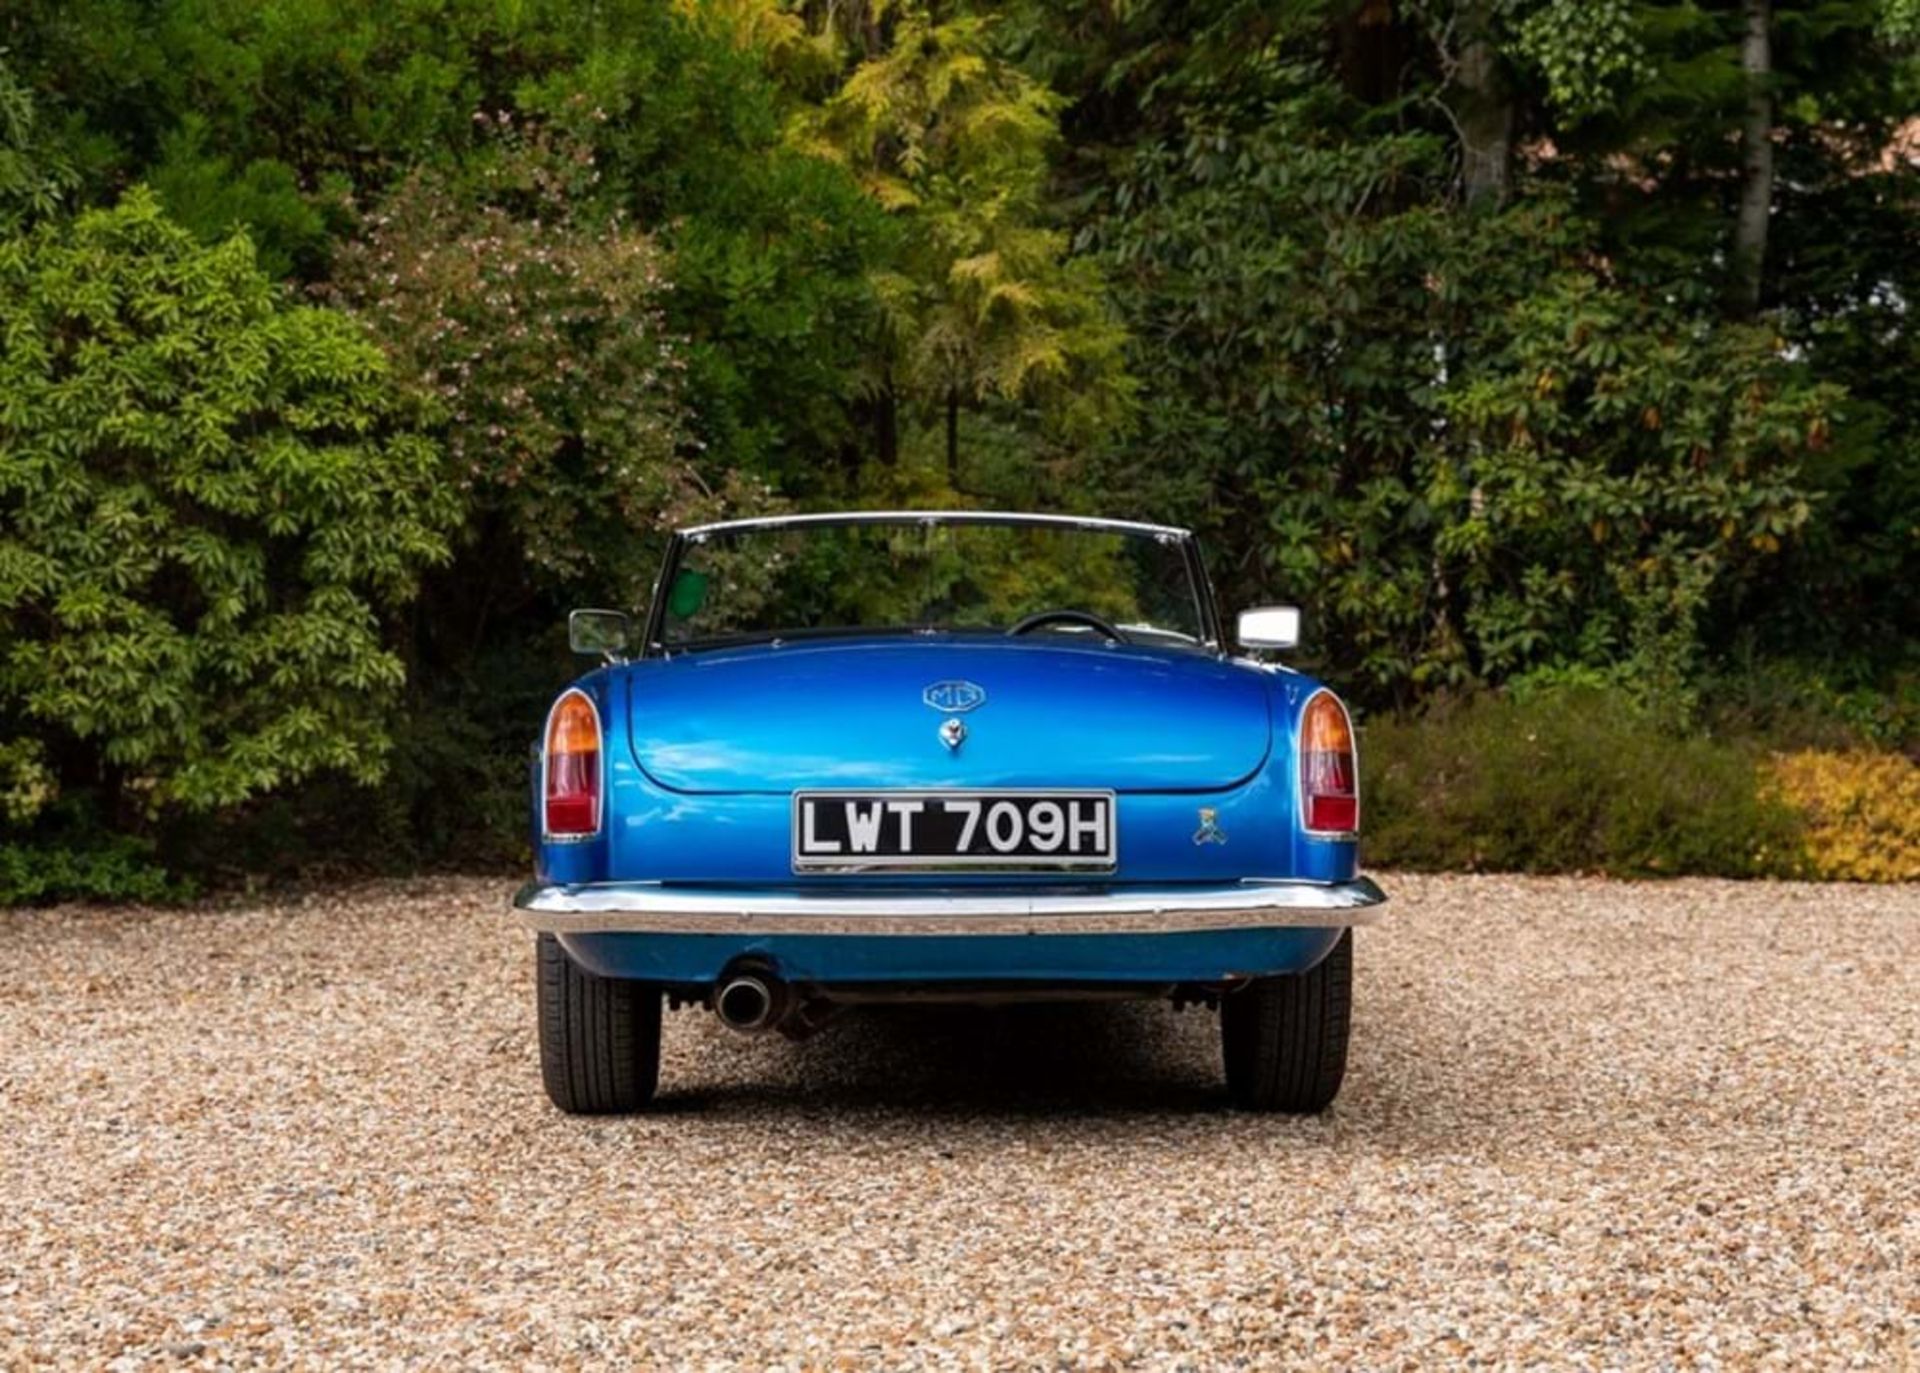 1968 MG C Roadster to V8 Specification - Image 5 of 10